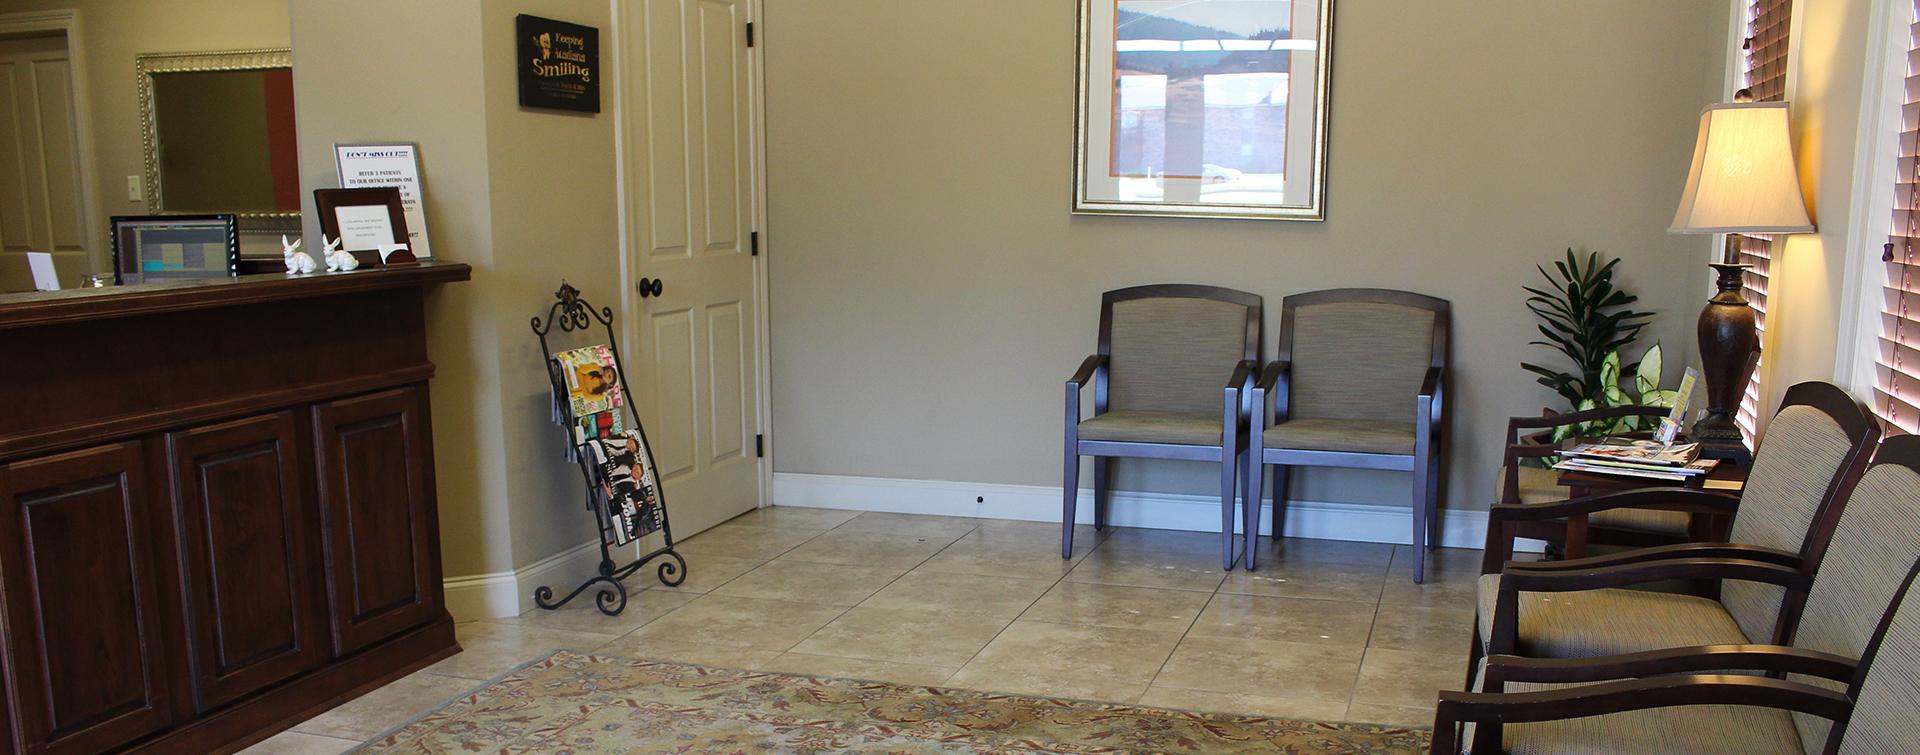 image of a dental office waiting room for Charles White DDS's family dentistry